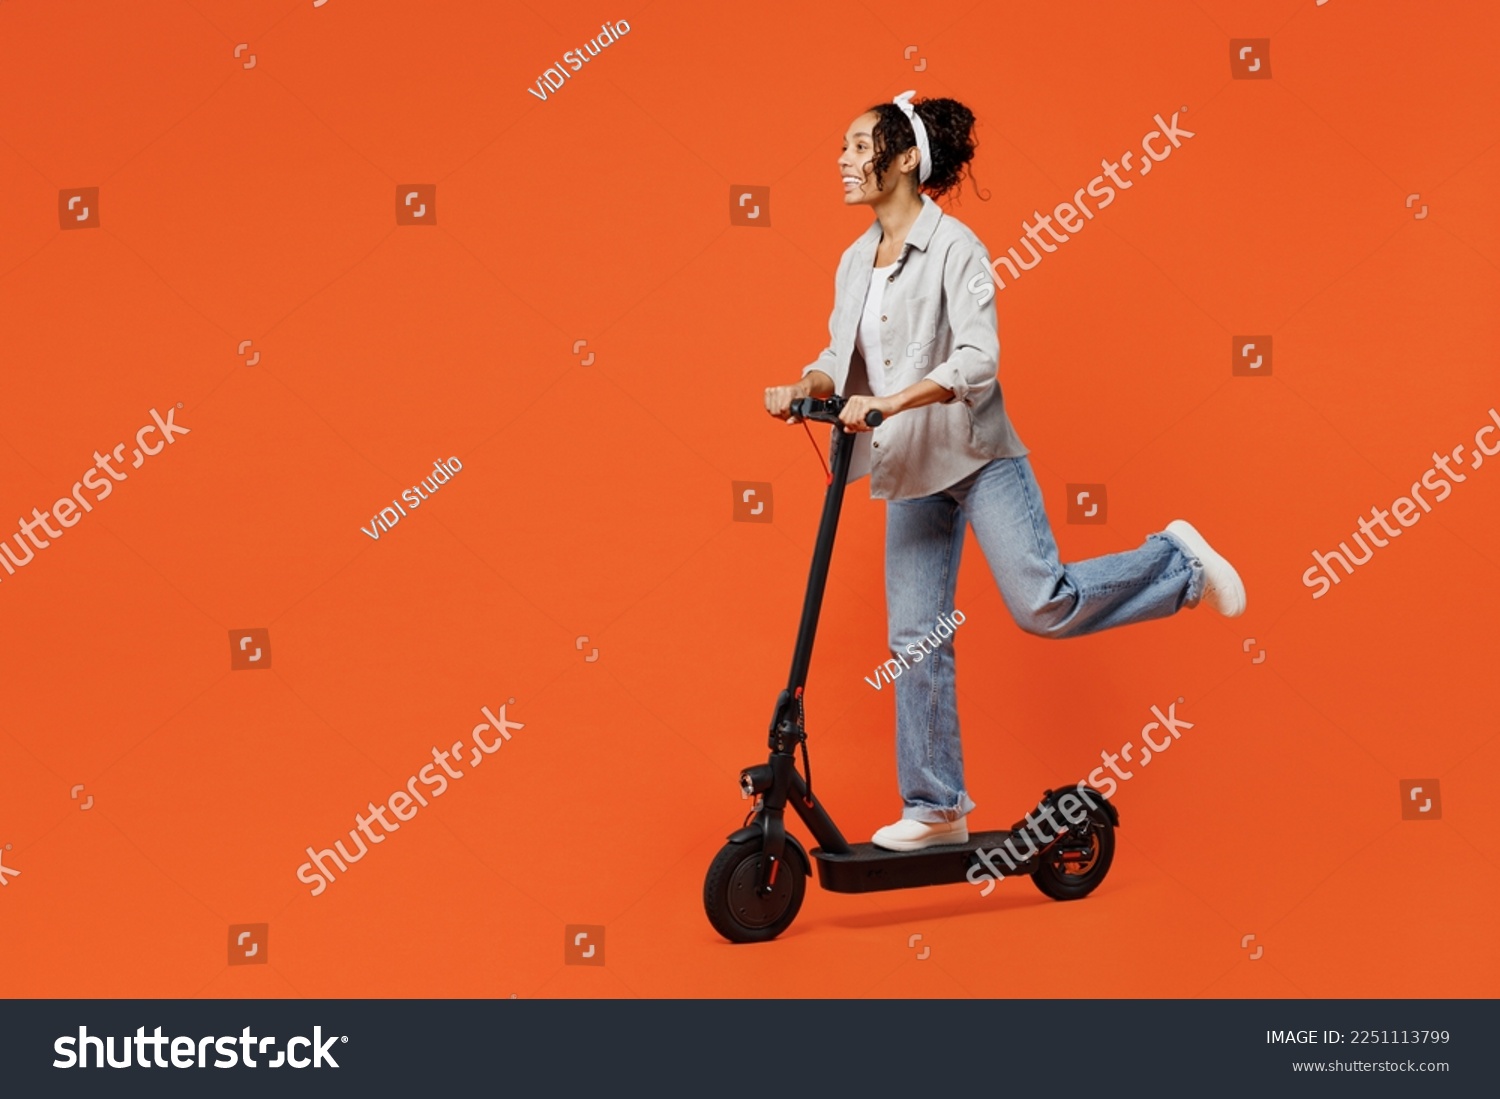 Full body young happy fun woman of African American ethnicity she wears grey shirt headband riding e-scooter look aside isolated on plain orange background studio portrait. People lifestyle concept #2251113799